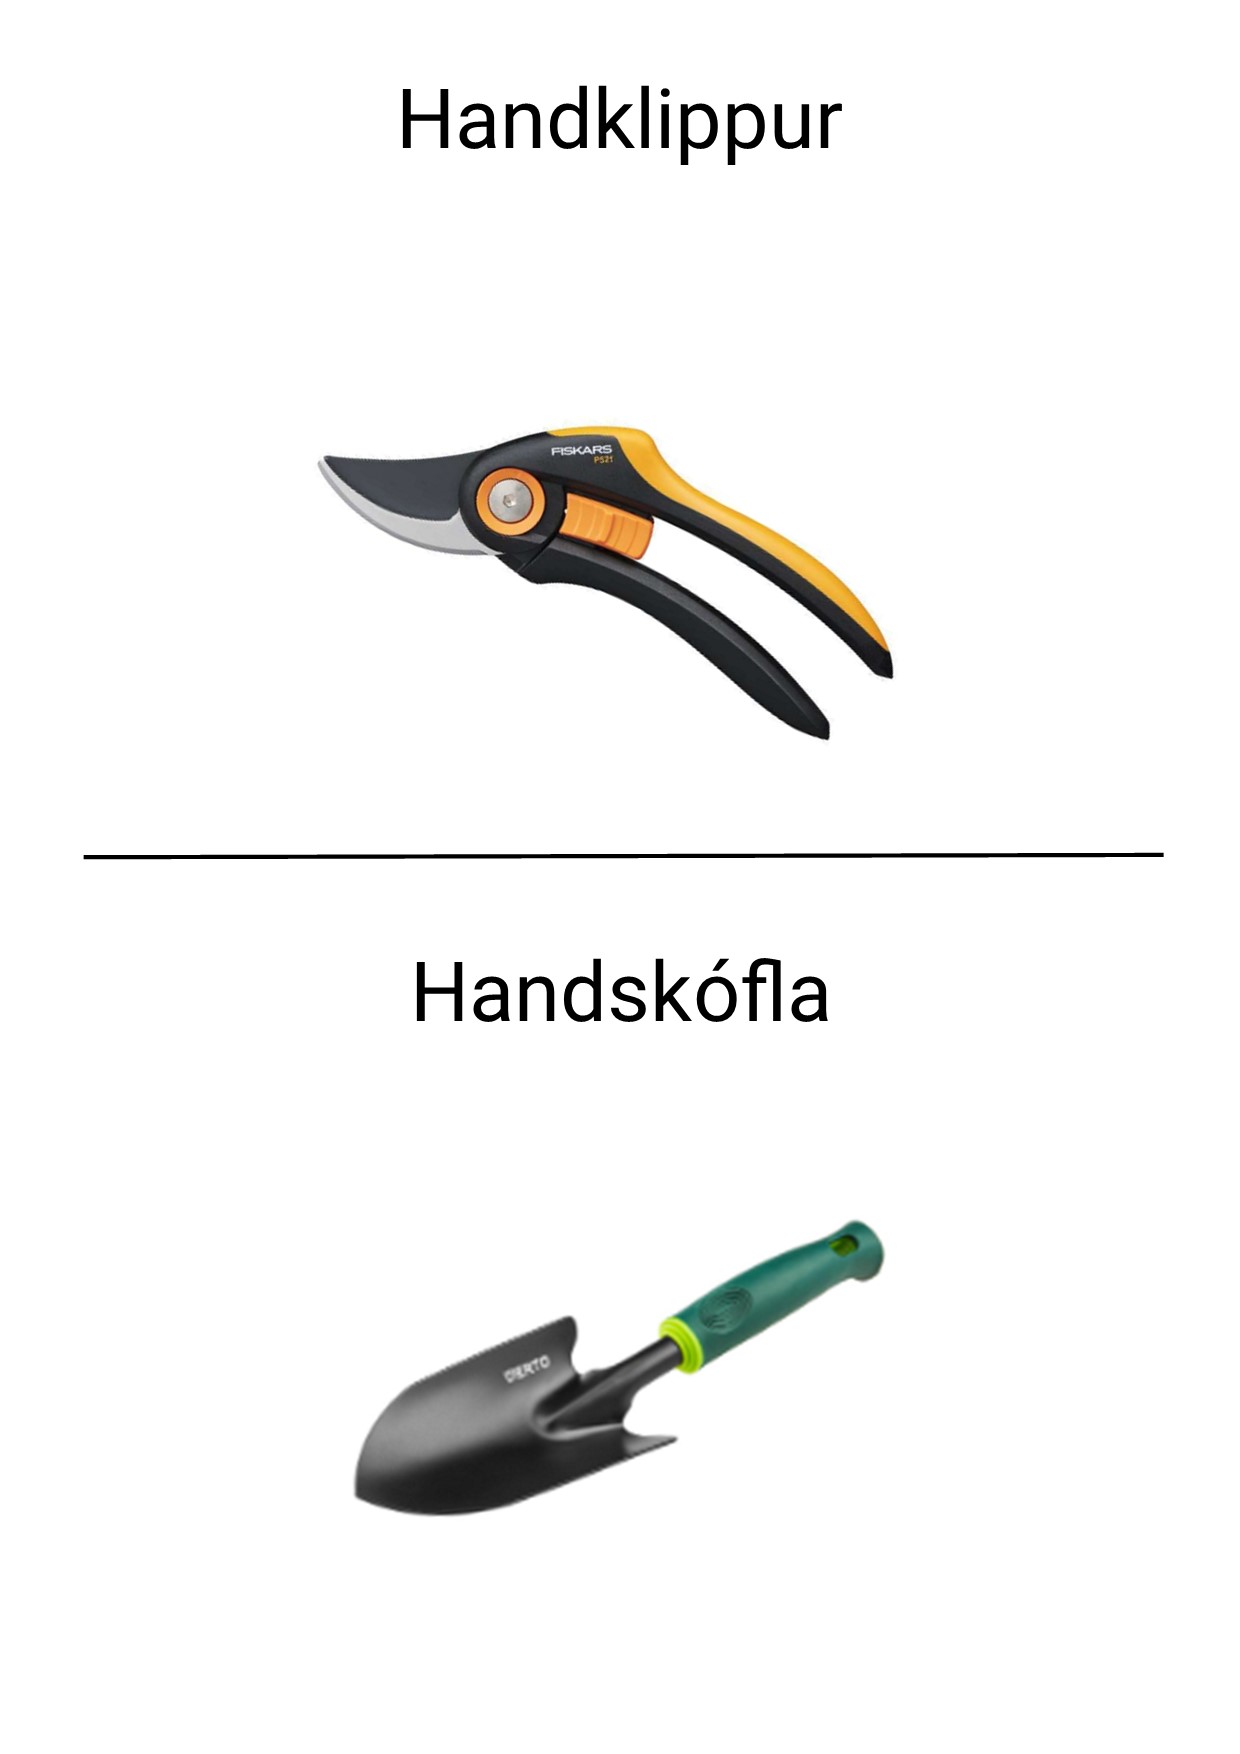 Picture of gardening tools